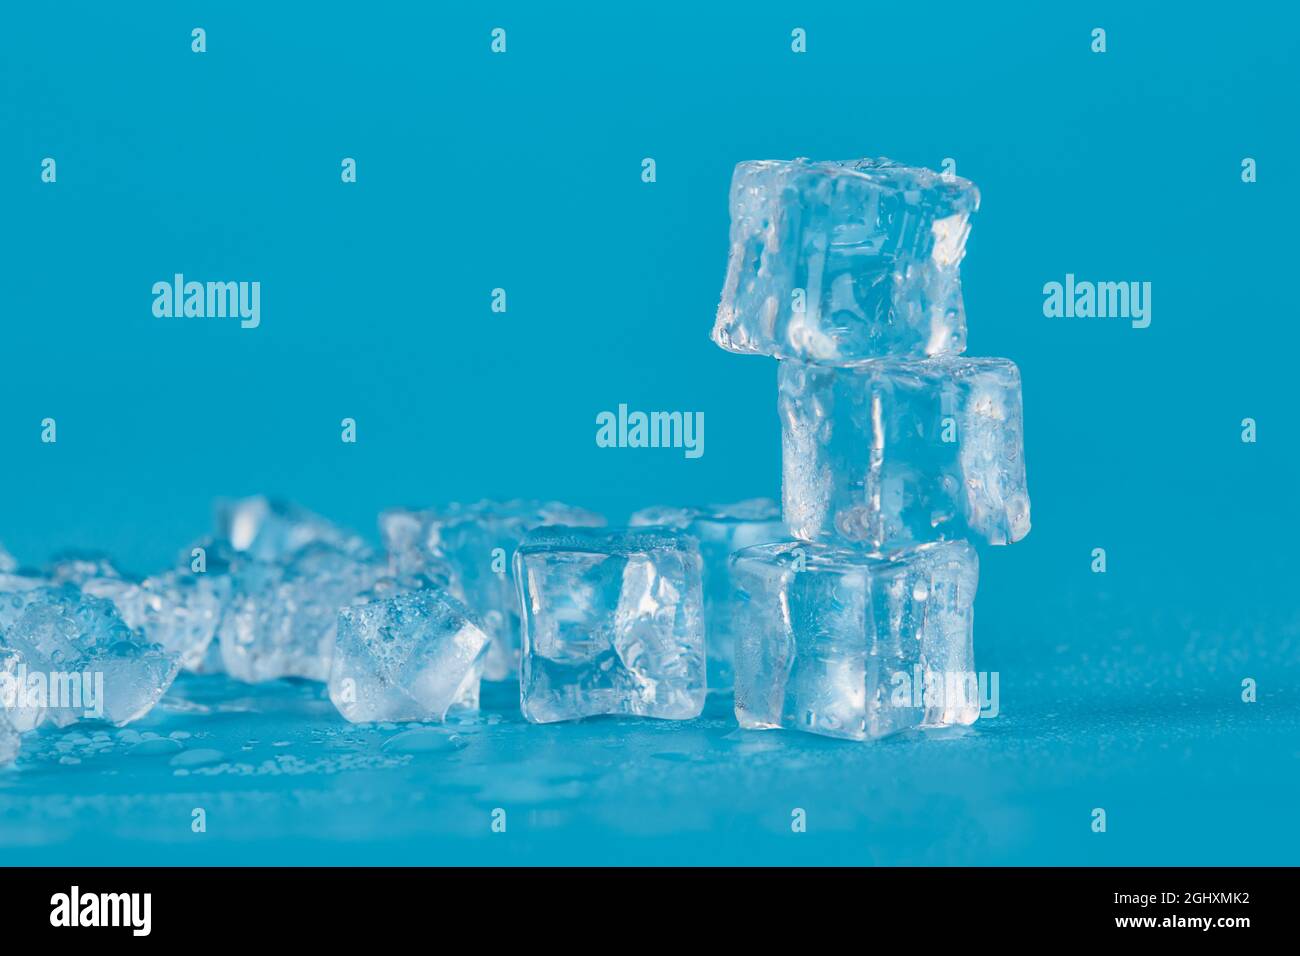 Lots of ice cubes and shards of ice on a blue background. three ice cubes stand one on the other on a blue background. Stock Photo